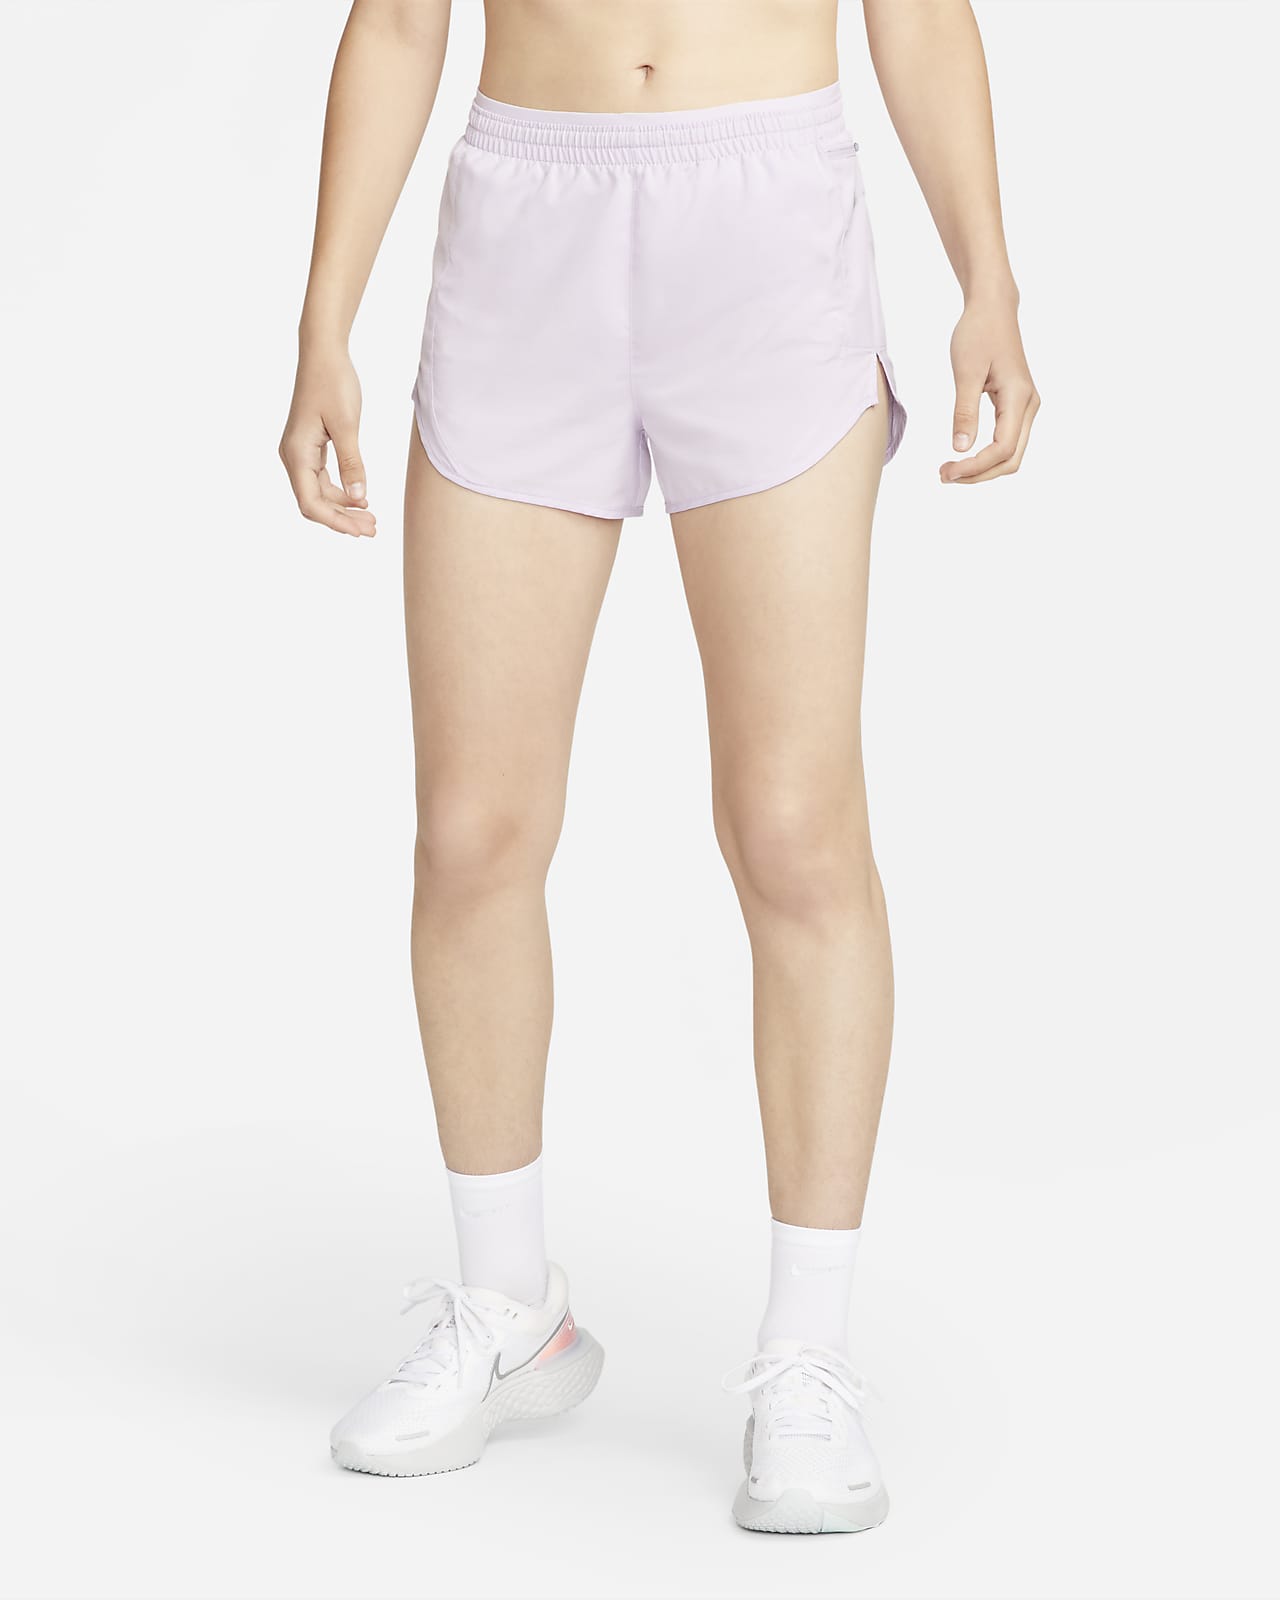 Nike Tempo Luxe Hardloopshorts voor dames (8 cm)